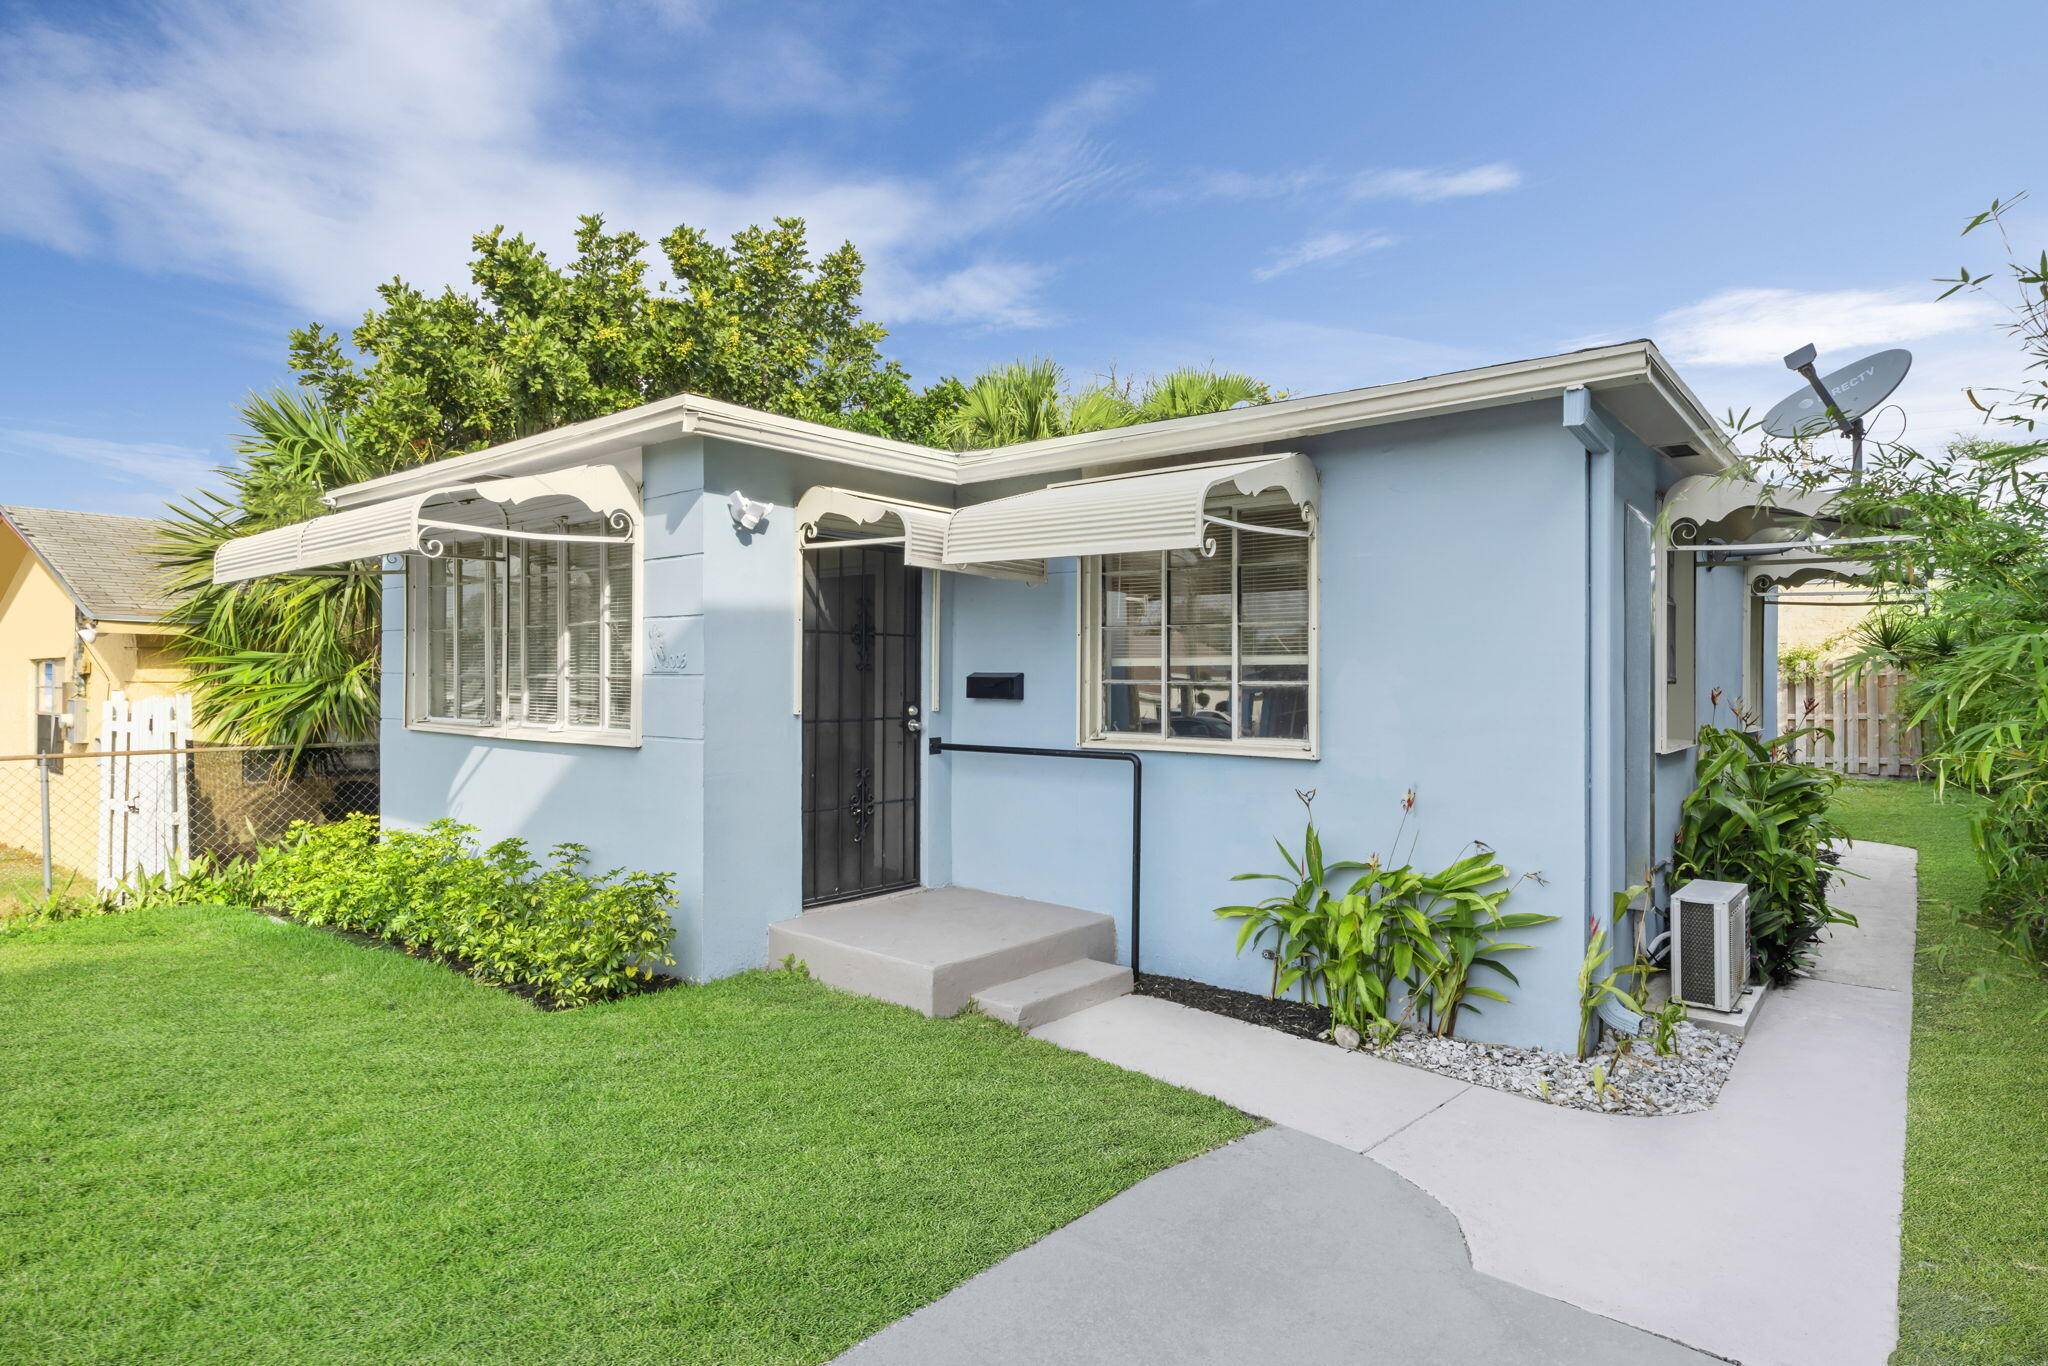 Step into a piece of history with this mid century home, offering timeless appeal and modern comfort.